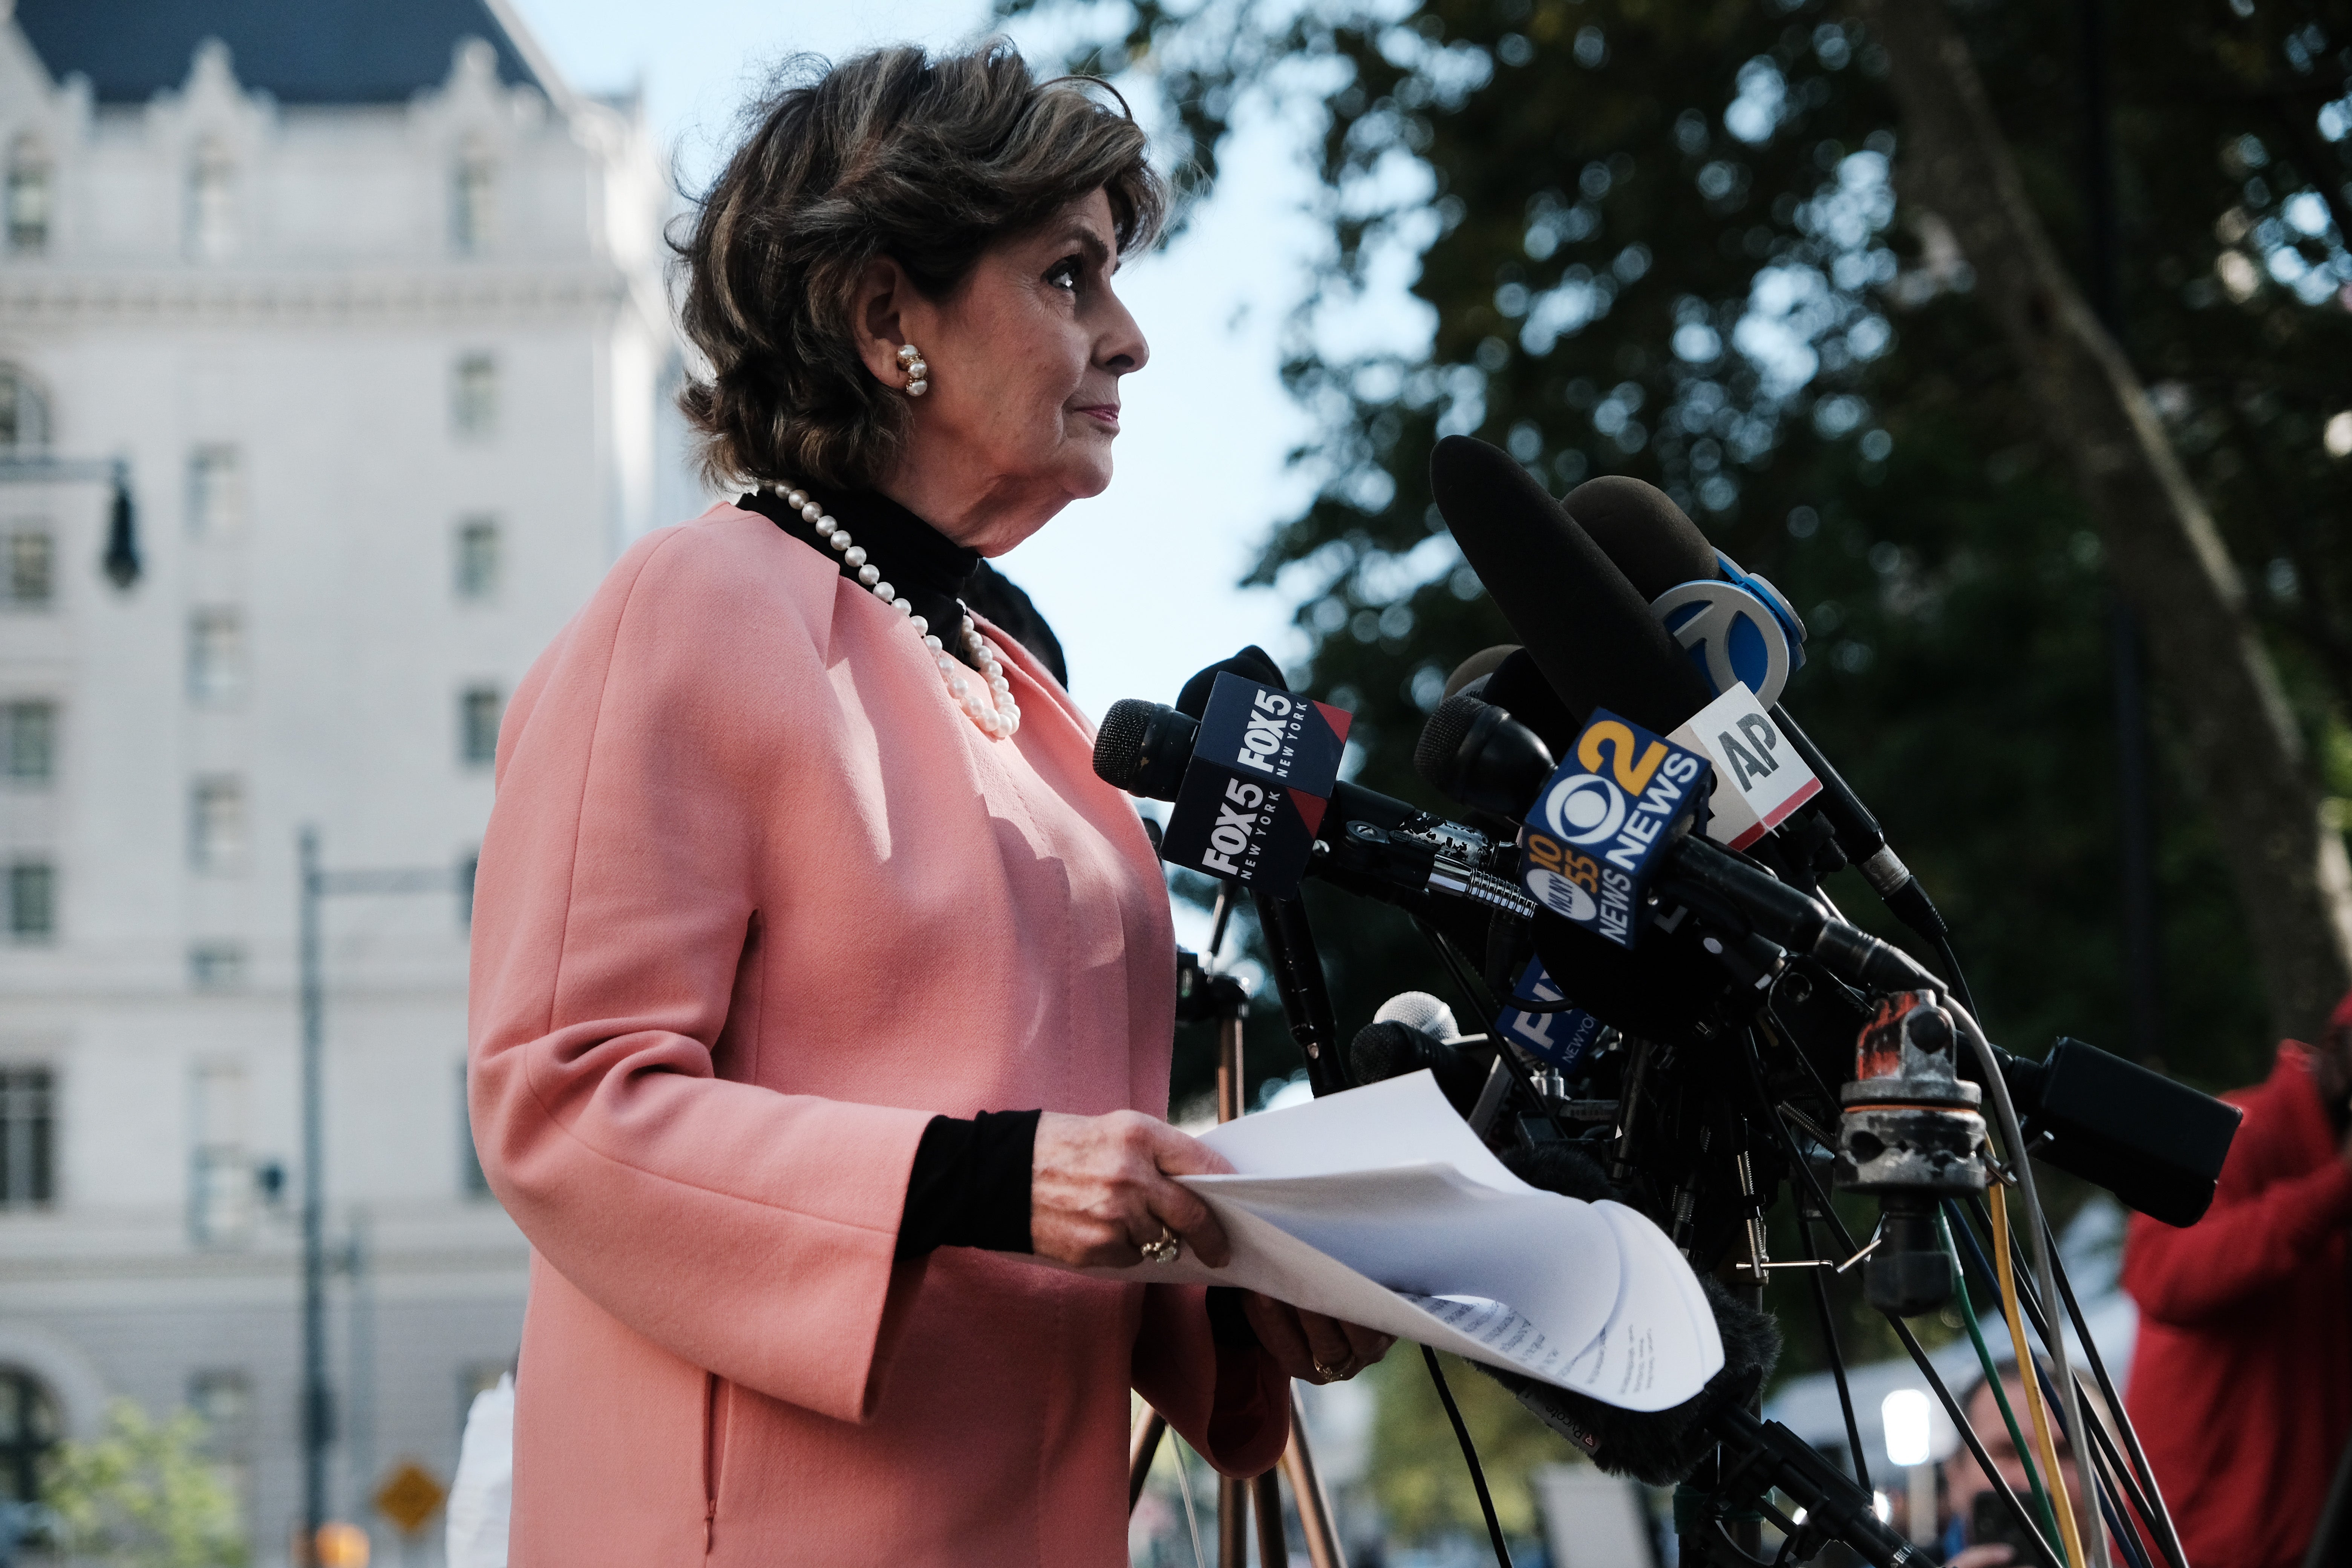 Lawyer Gloria Allred represented many of Kelly’s accusers in his first trial